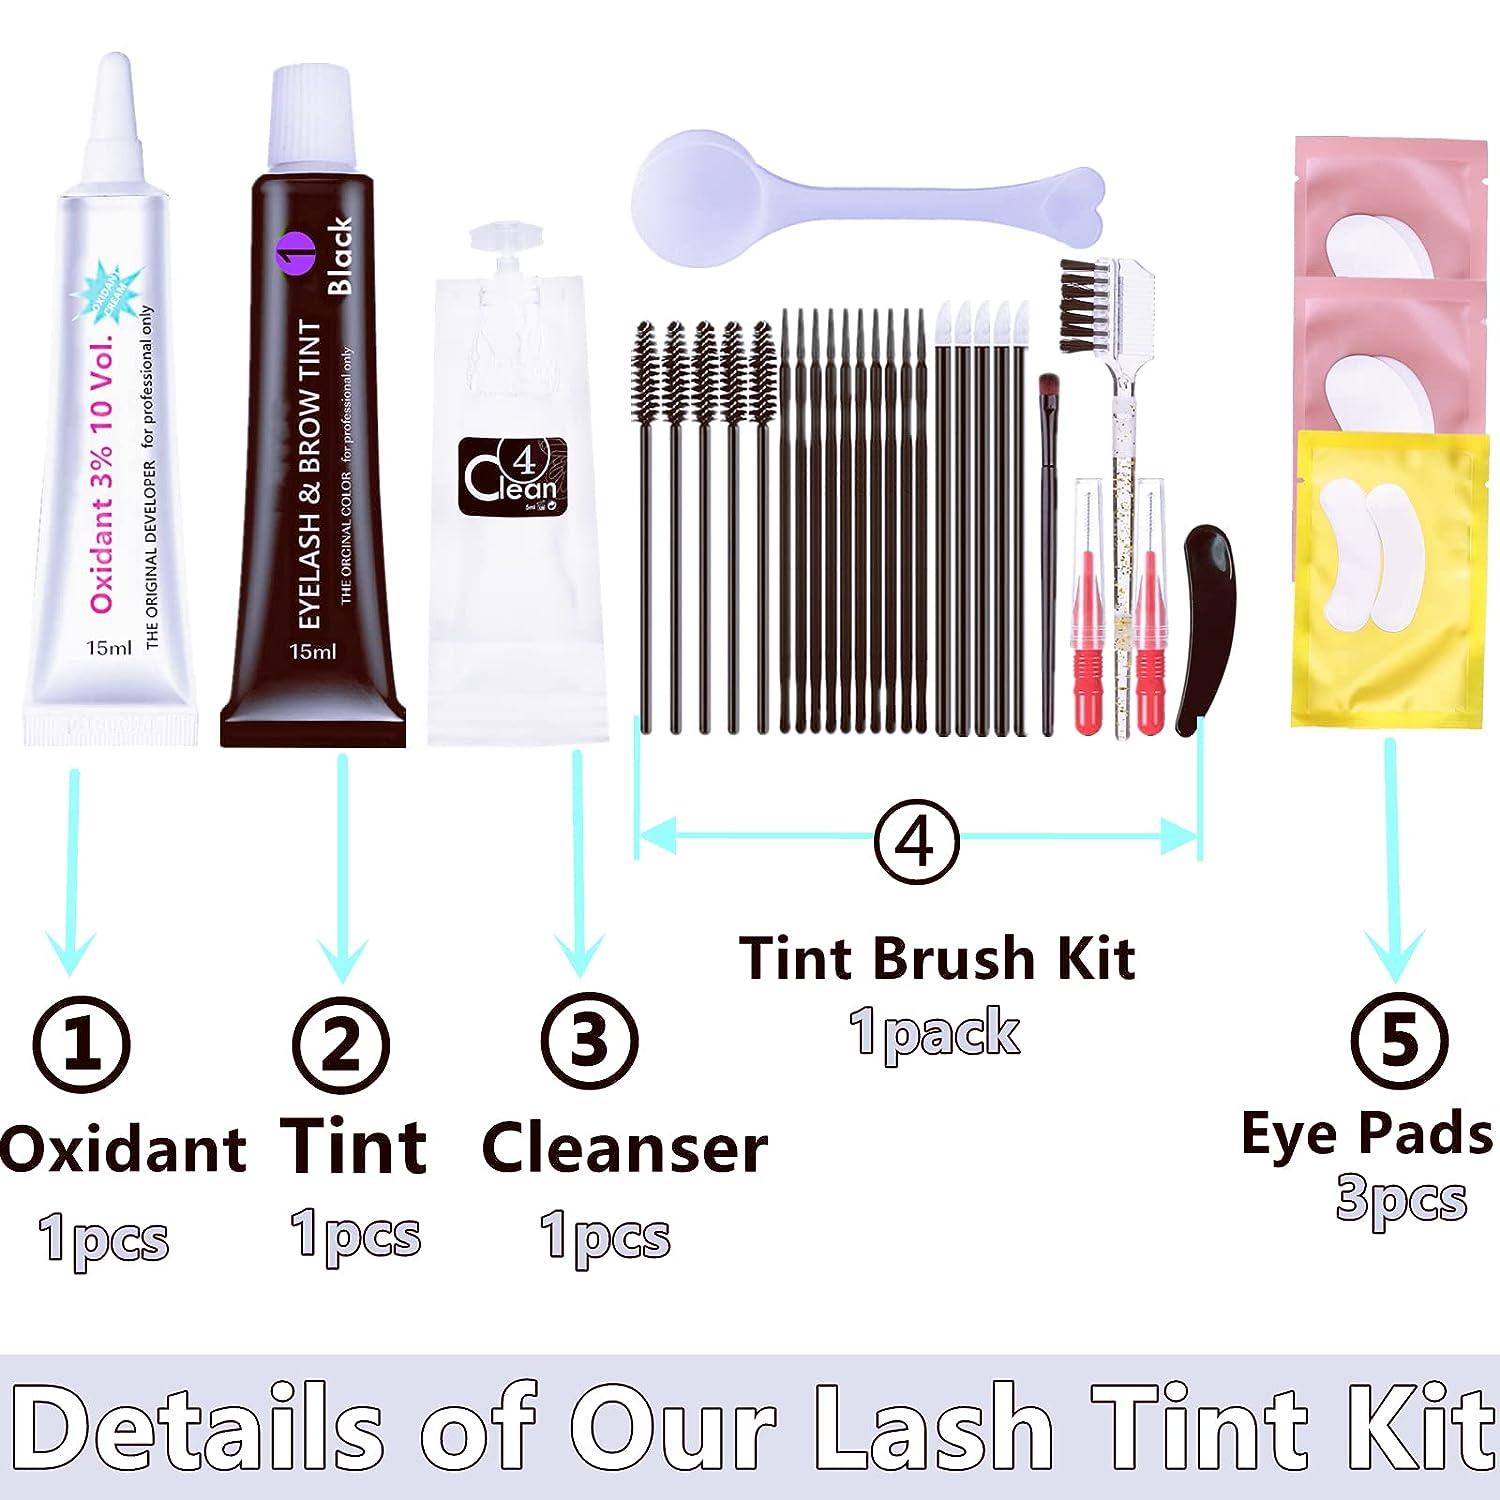 Lash T-i-n-t Kit Black 15ml Eyelash D-y-e Full Brow T.i.n.t. Set With Tools  DIY Eyelash Eyebrow T-i-n-ting Makeup At Home Be Voluminous And Energetic  For 6 Weeks(Black Stain Mascara Look)